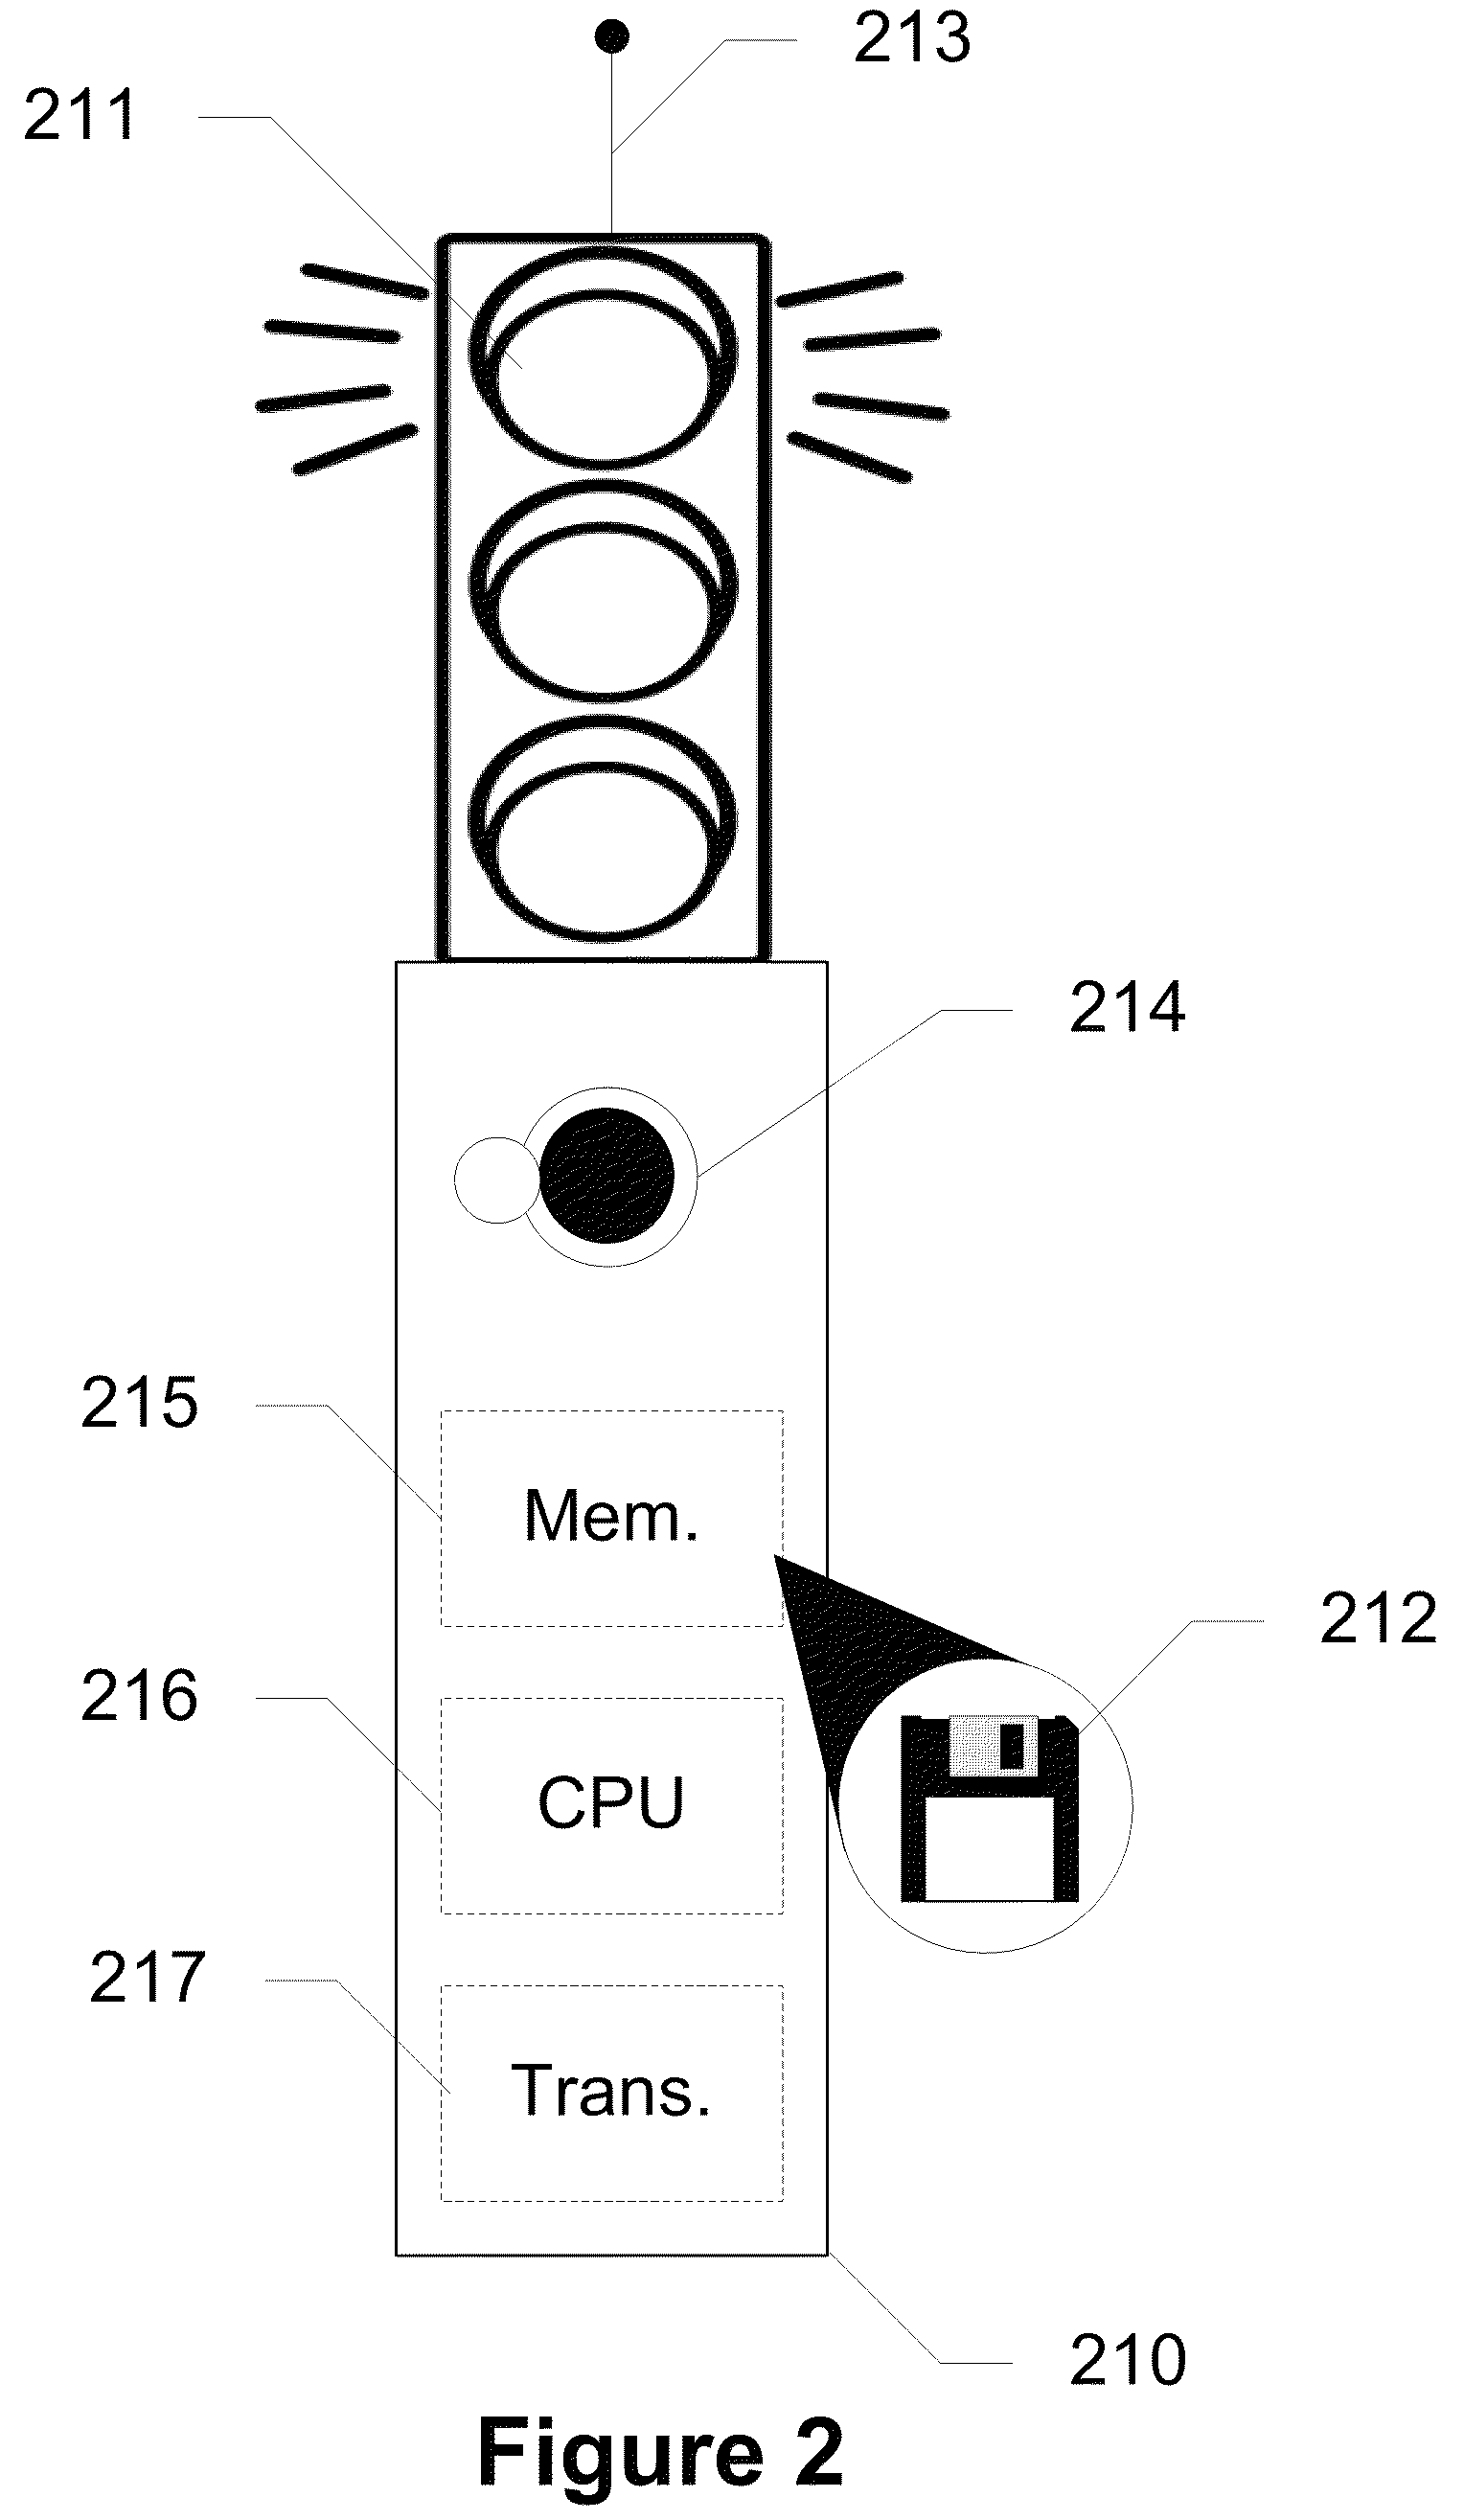 Devices, systems and methods for detecting a traffic infraction